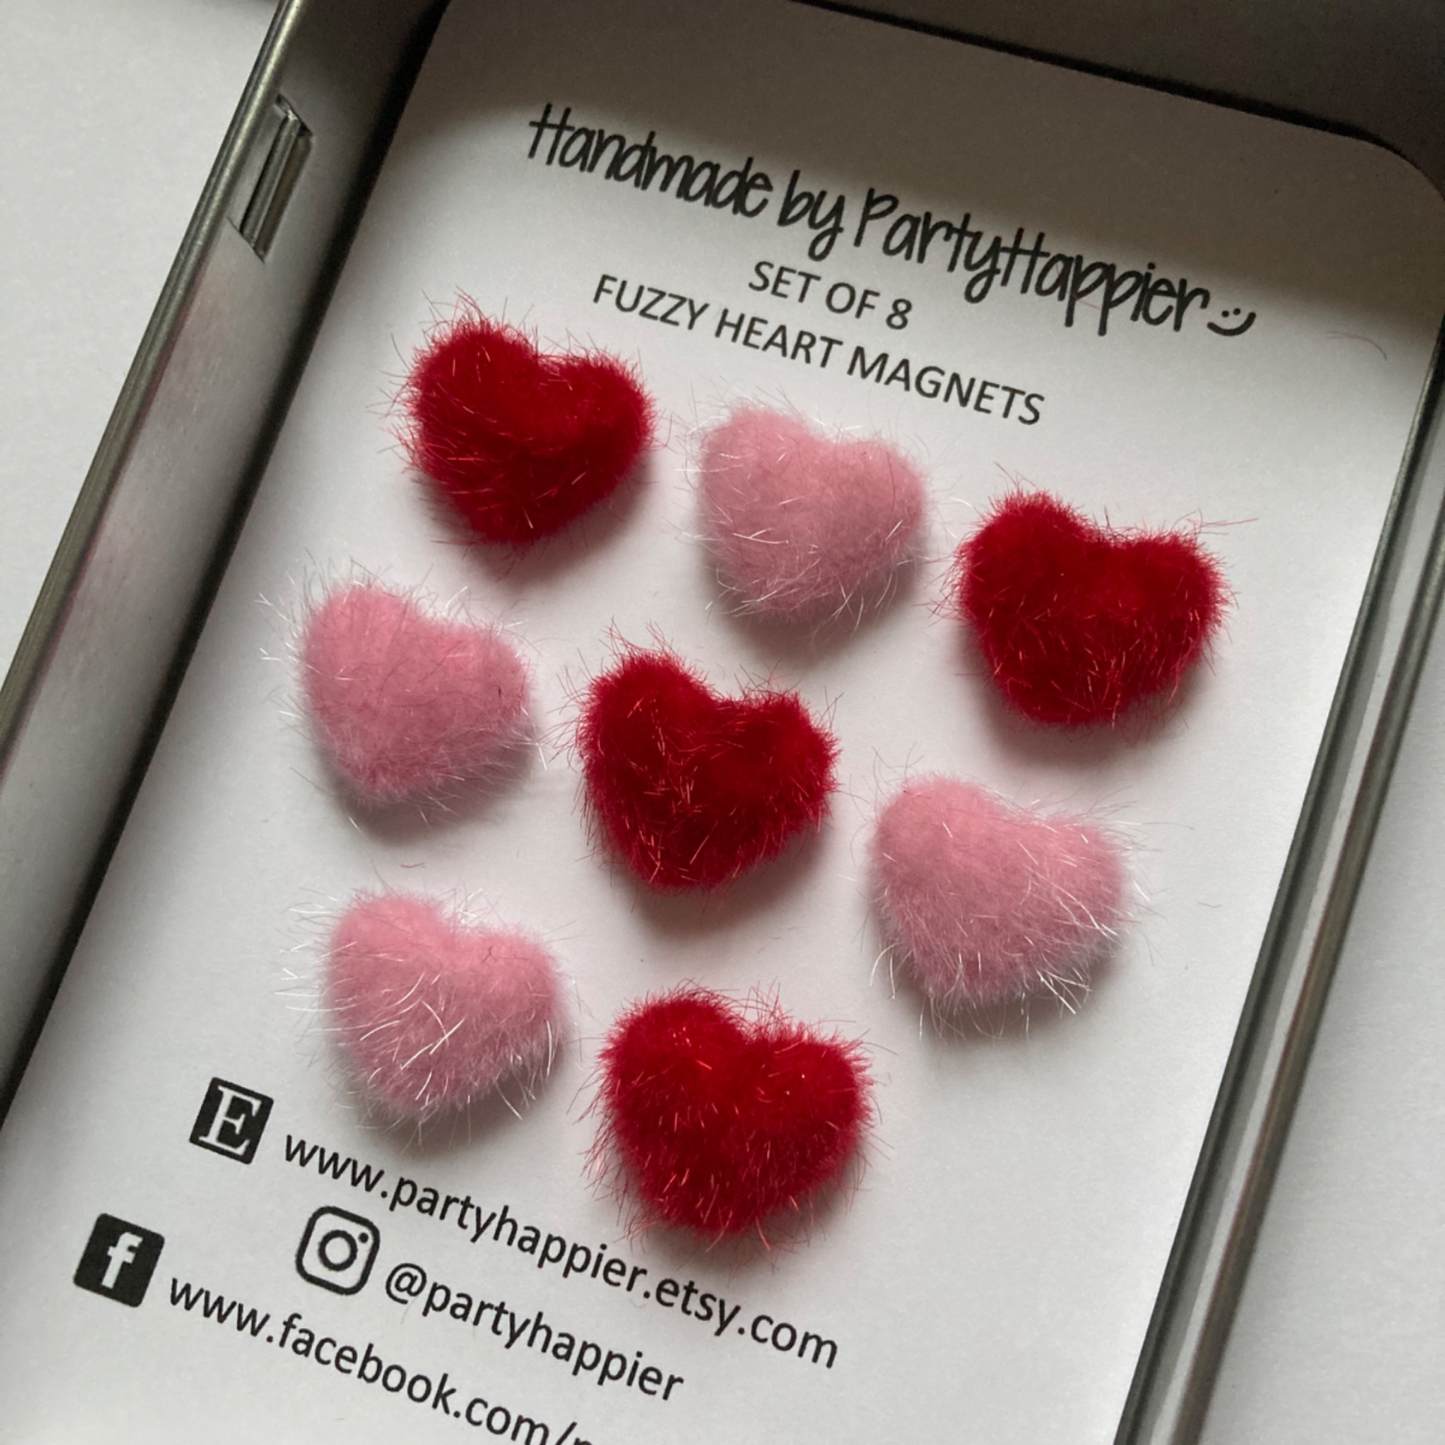 Fuzzy Heart Magnets